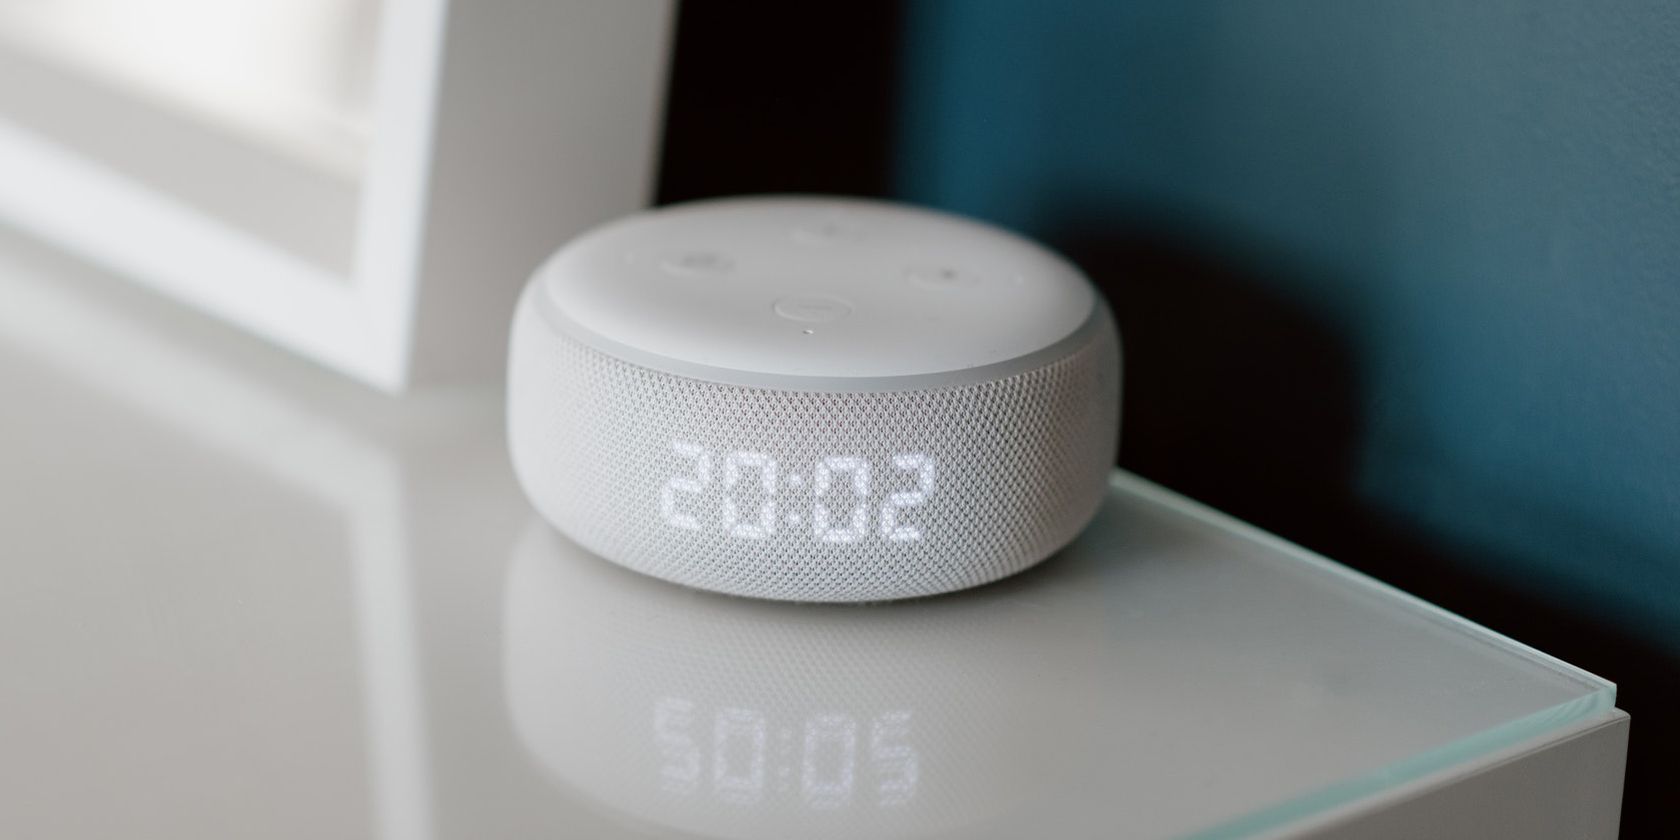 An image showing Amazon Echo Dot and its clock